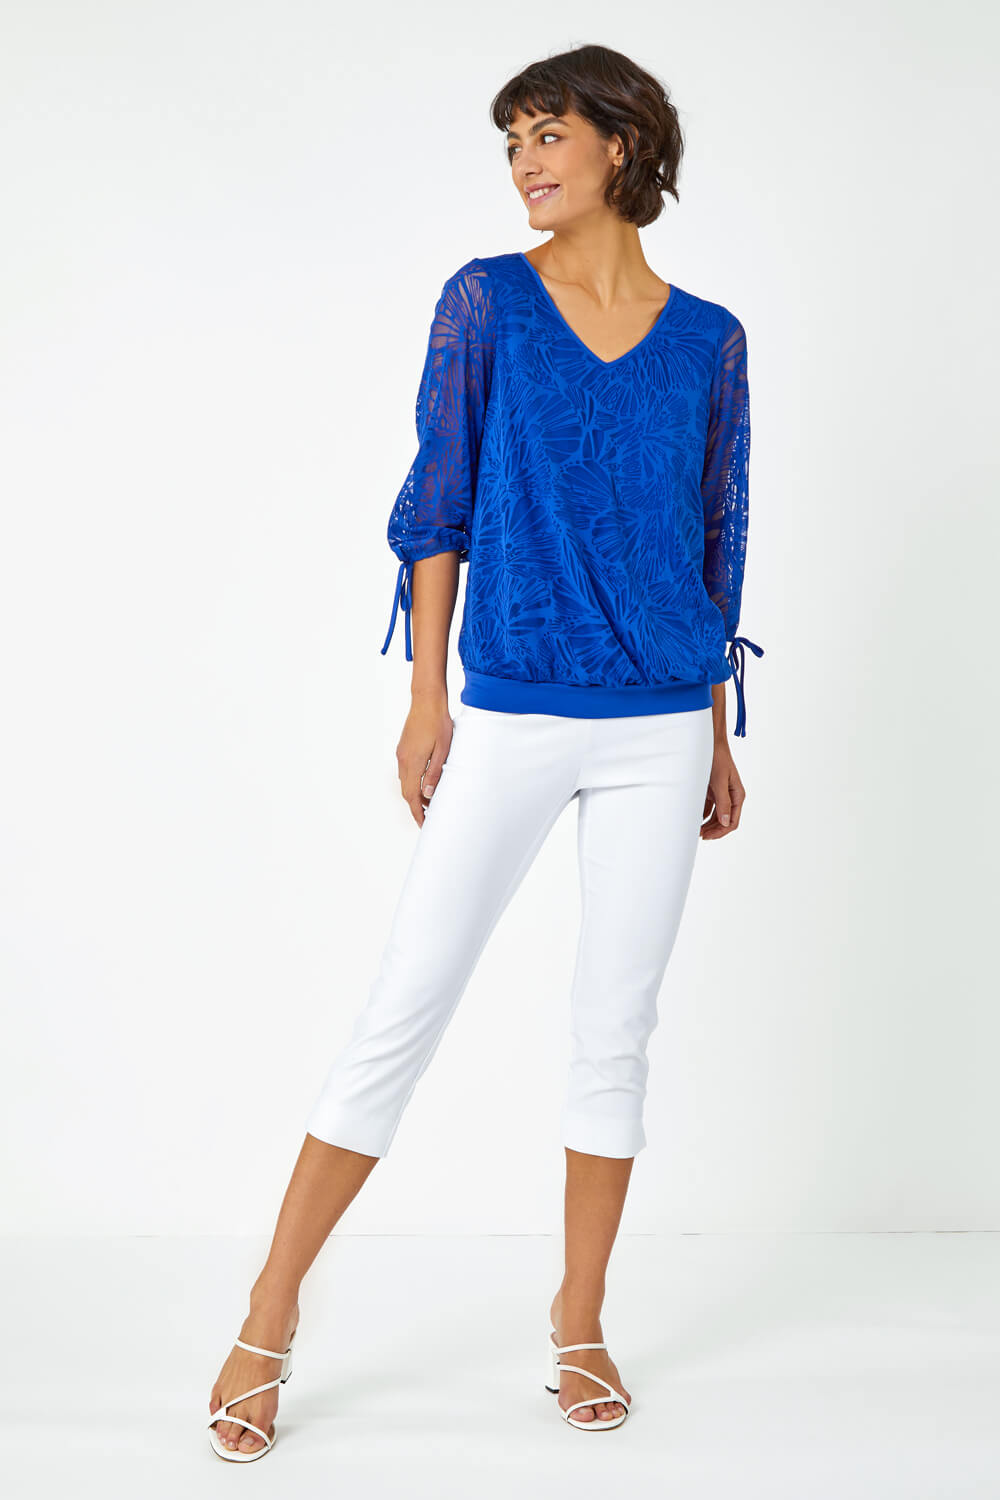 Royal Blue Burnout Tie Sleeve Overlay Top, Image 4 of 5